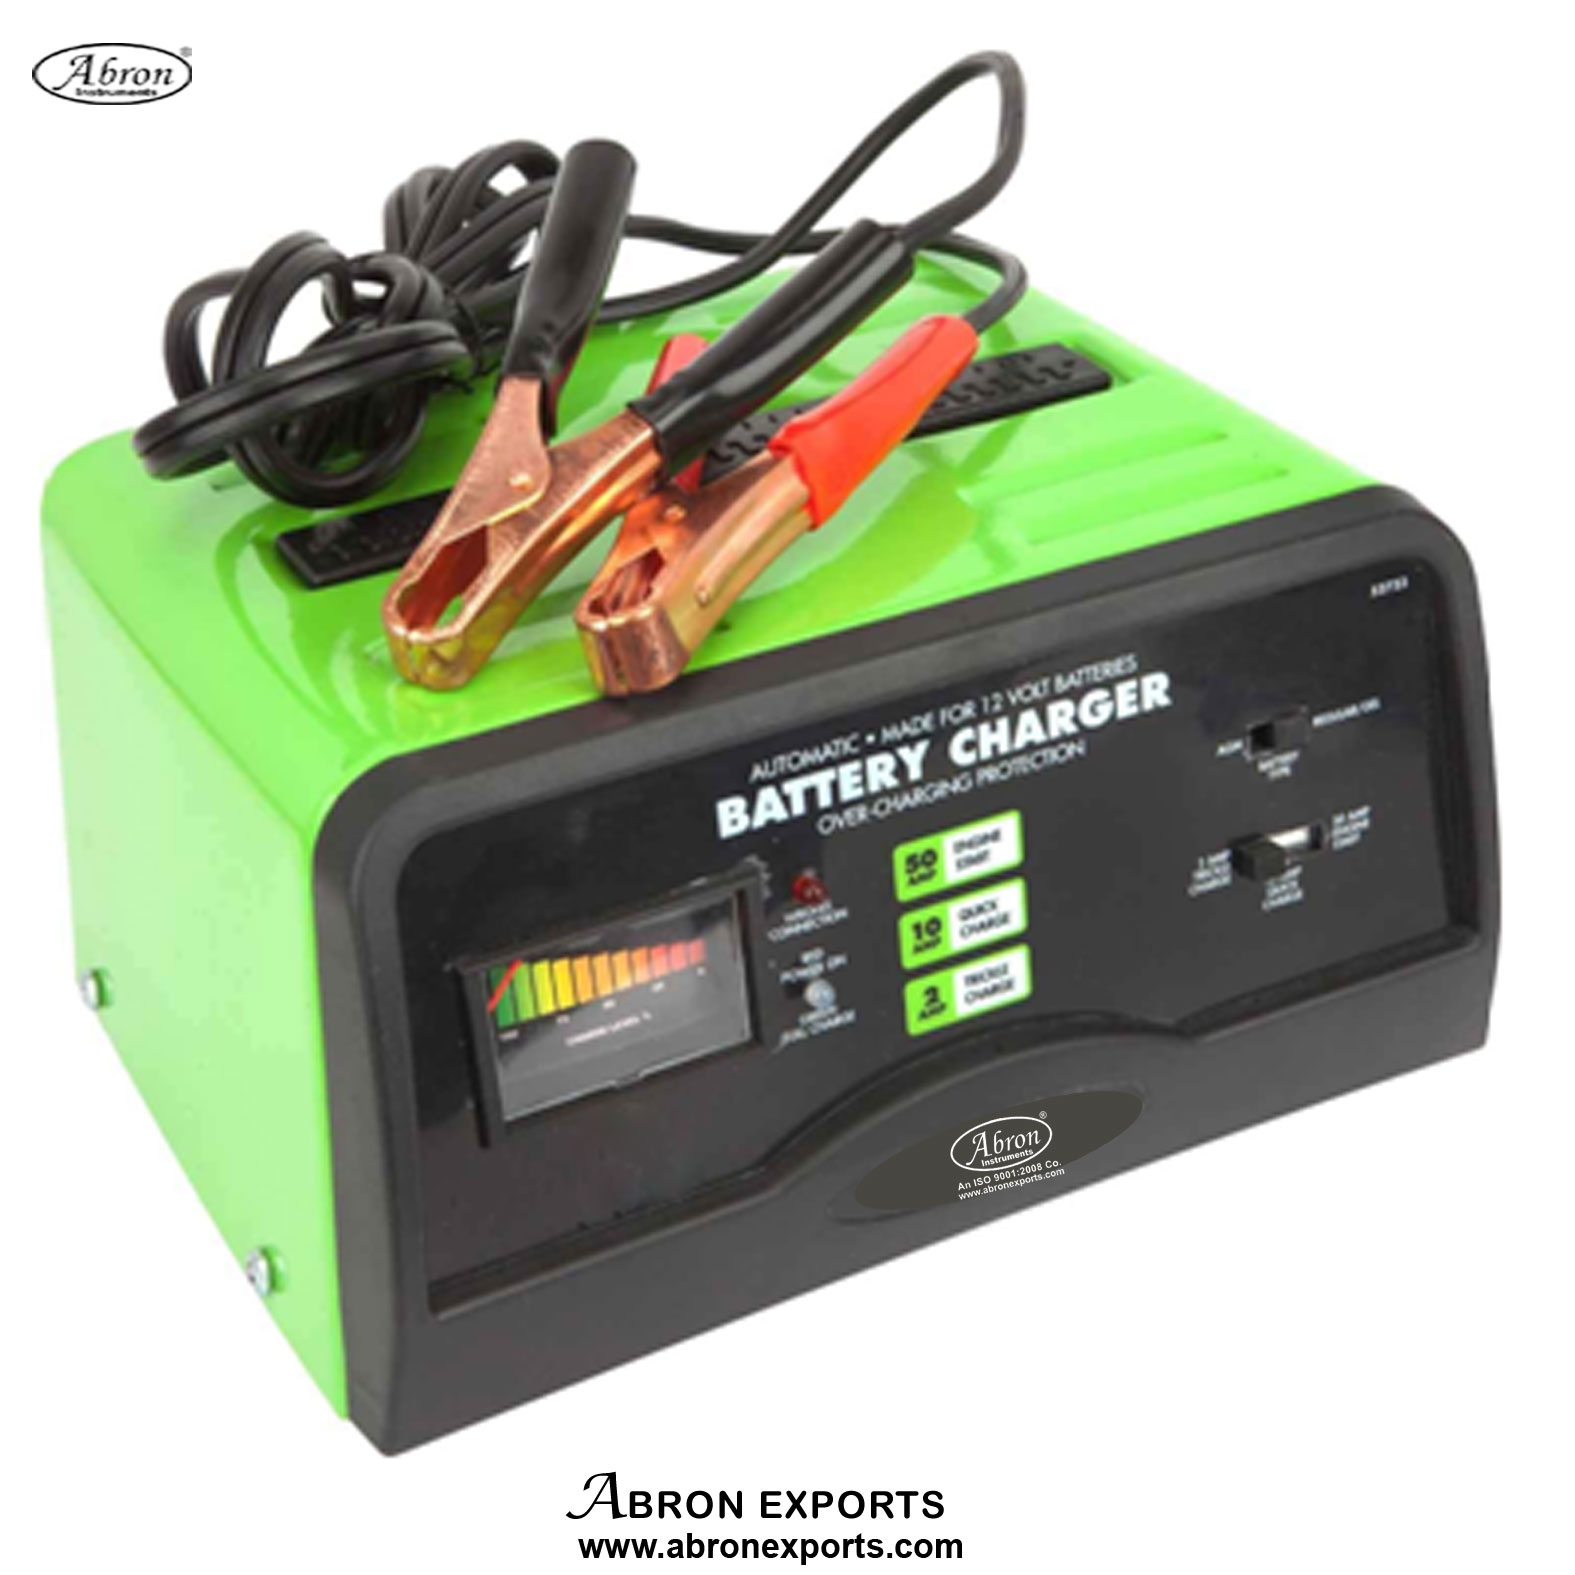 Battery Charger Automatic With Meter10 Amp 12 volt Auto Abron  AE-1207A10